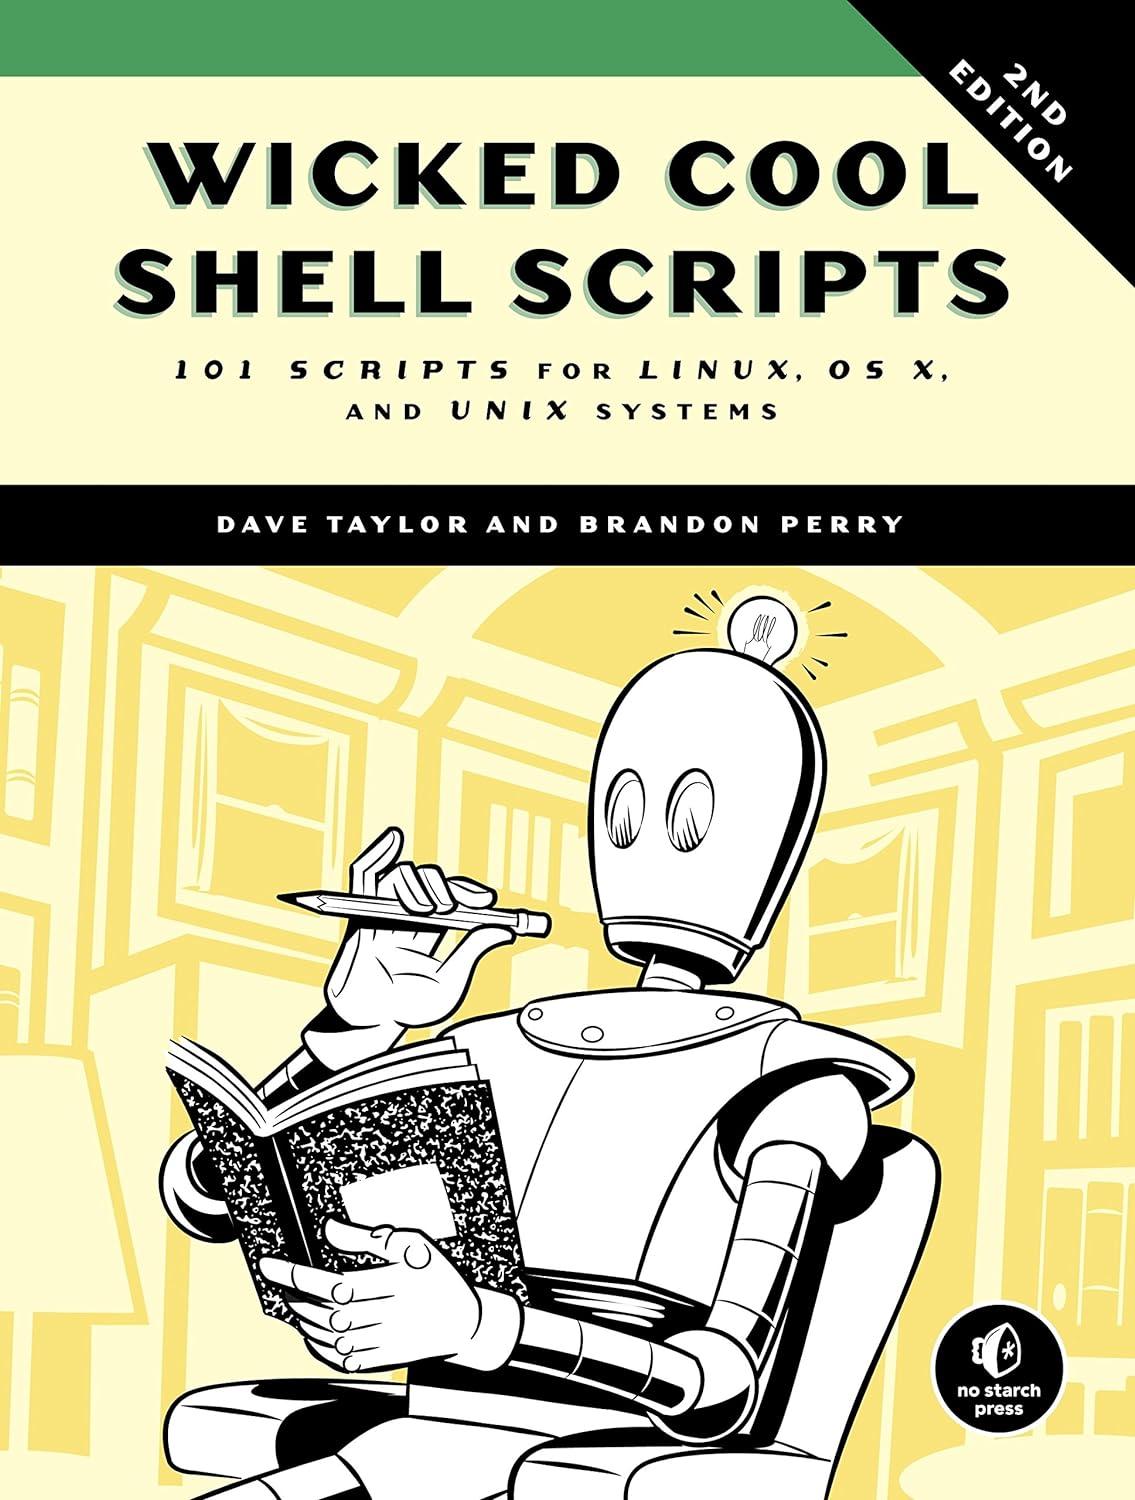 wicked cool shell scripts 2nd edition dave taylor, brandon perry 1593276028, 978-1593276027